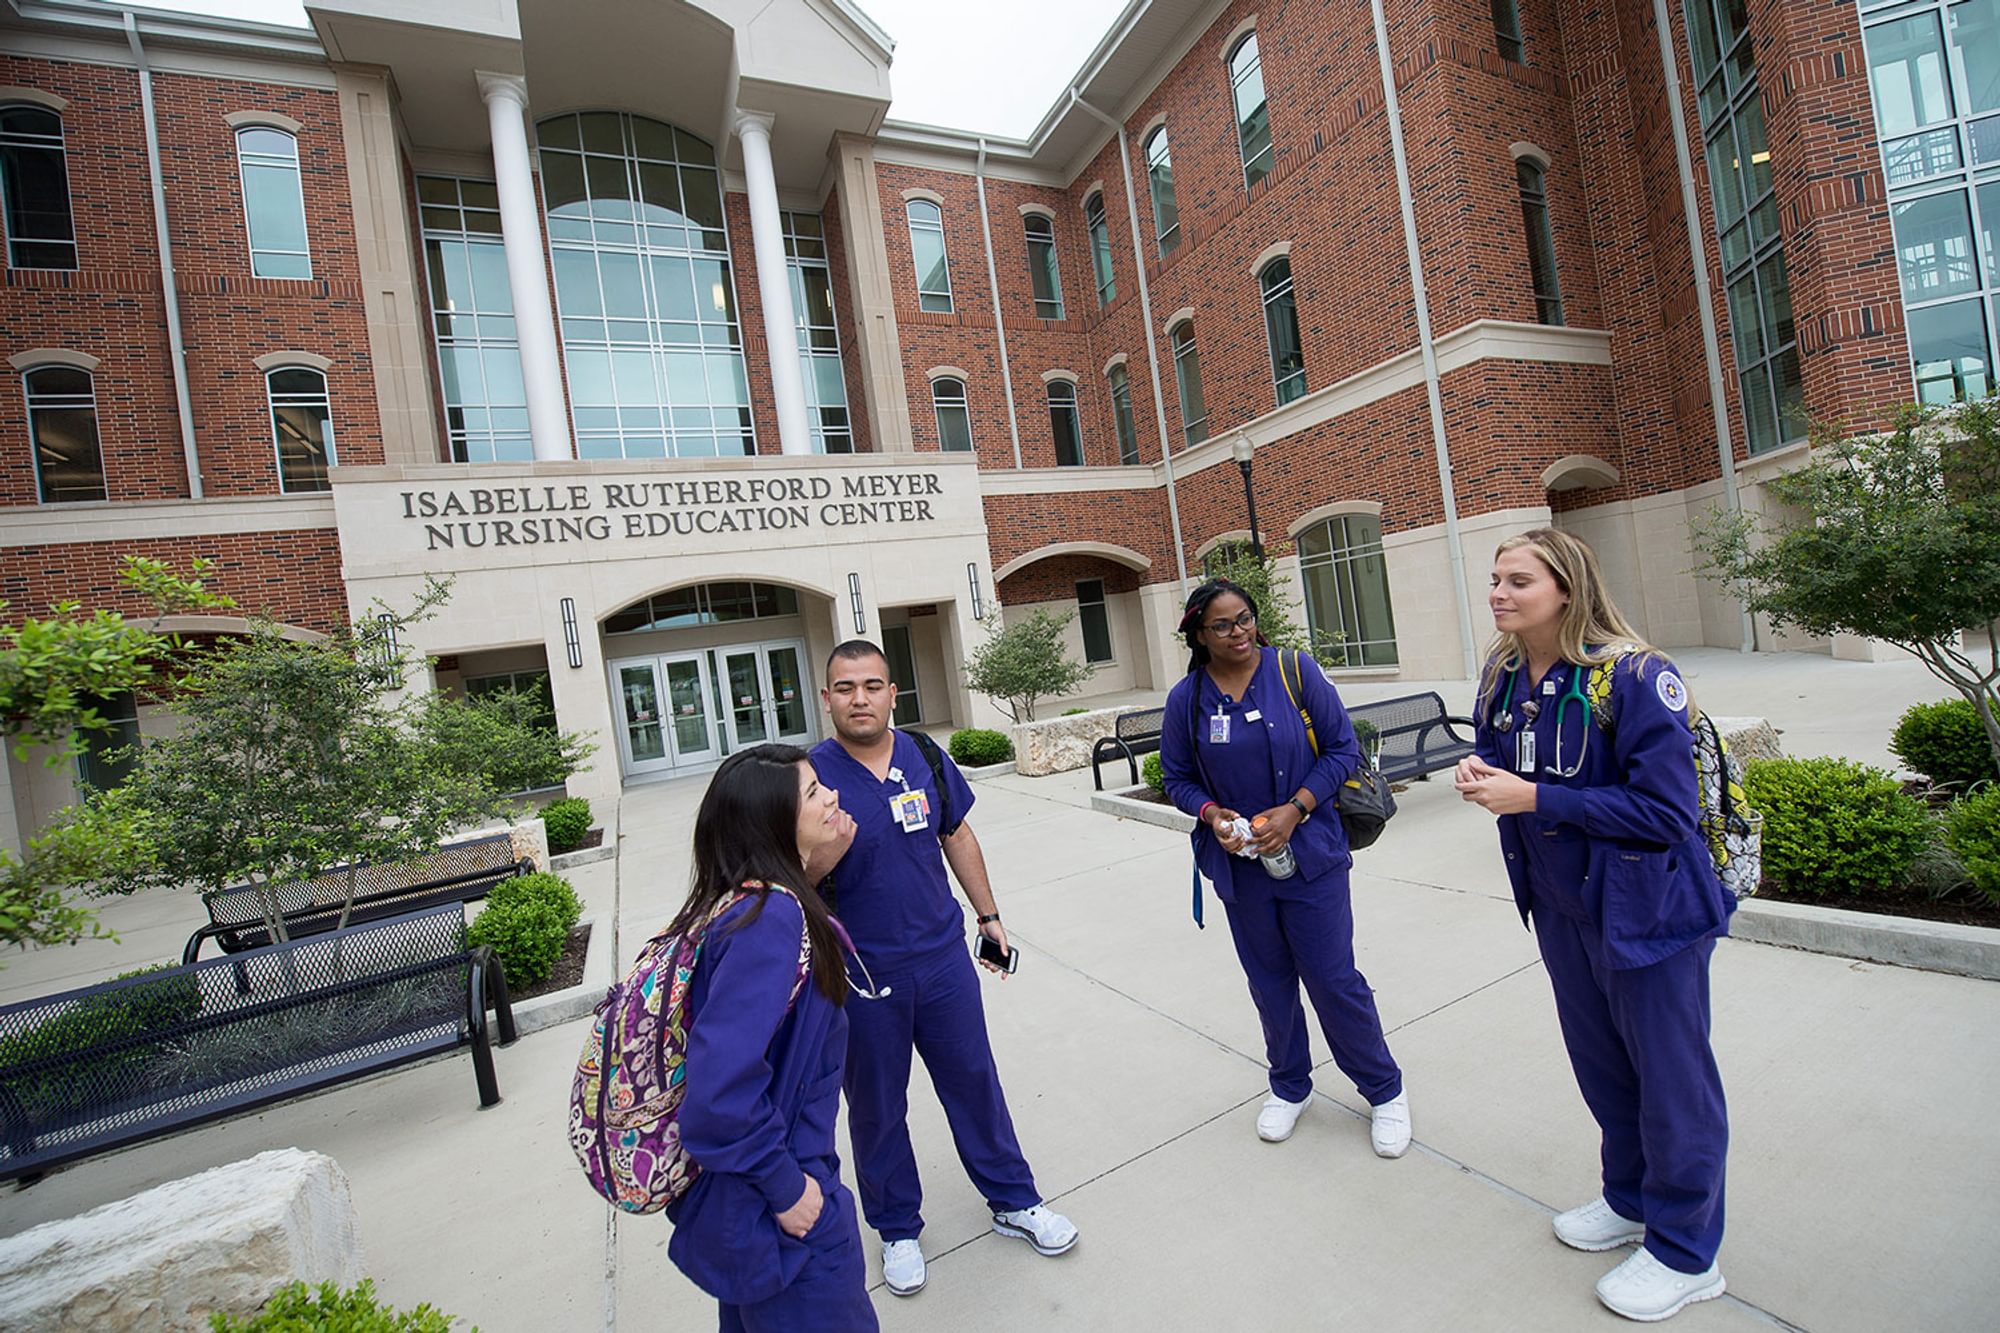 Photos of students talking in front of the Nursing Education Center after class